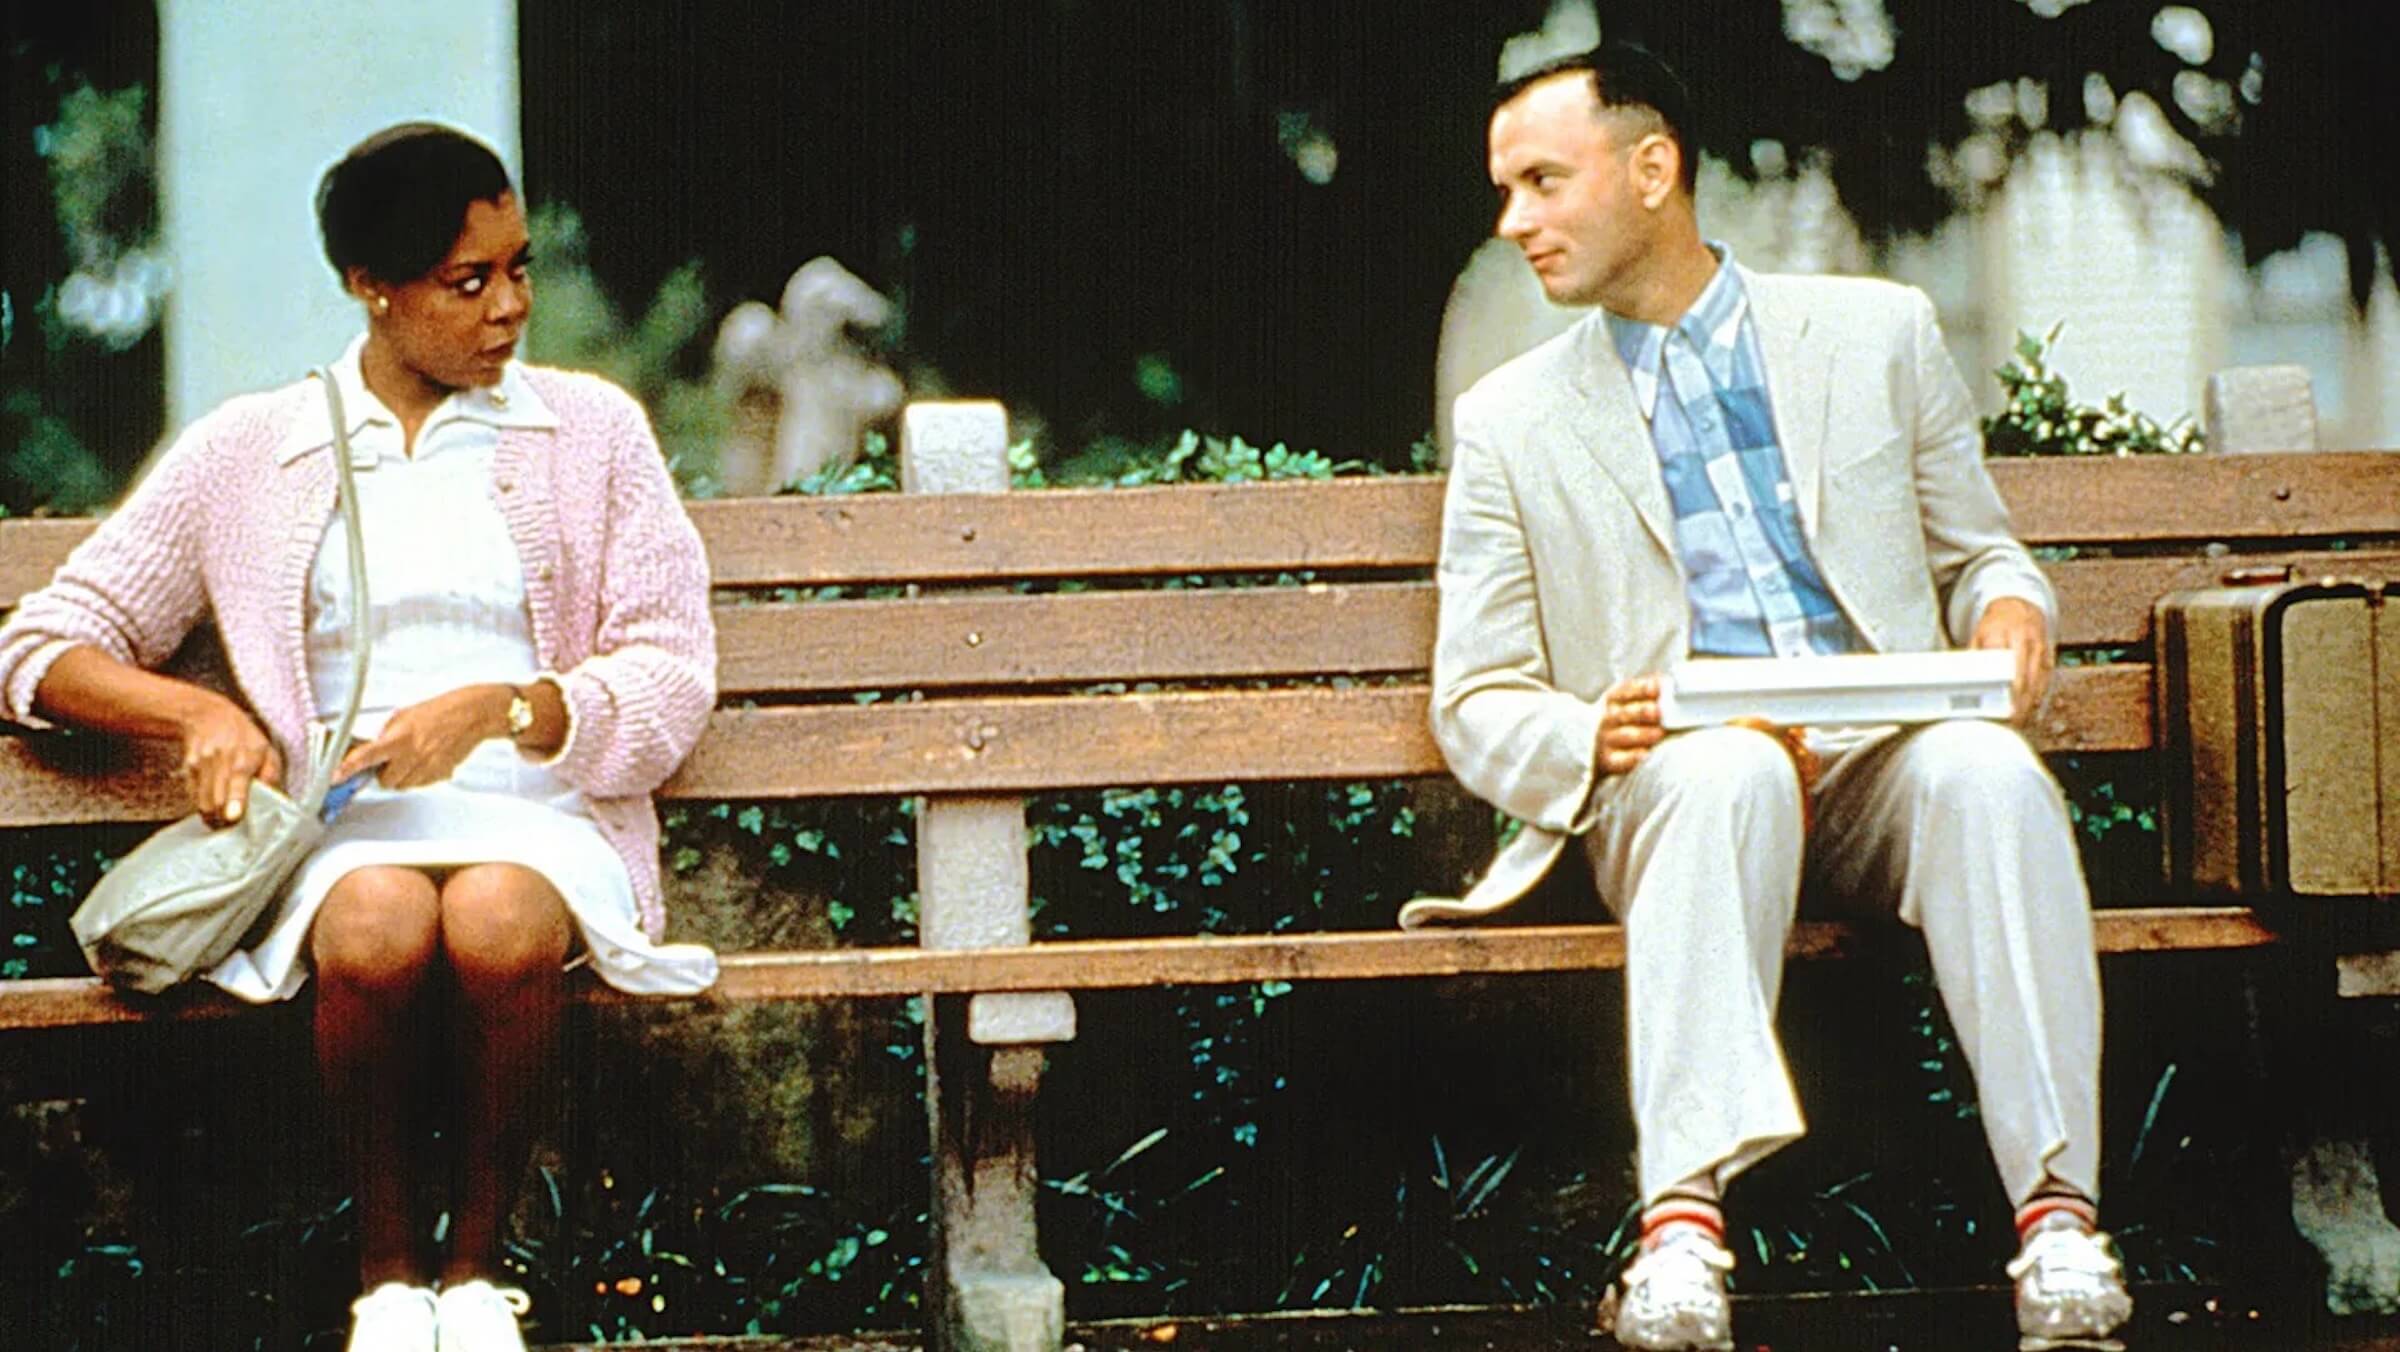 15 Most Quotable Movies of All Time